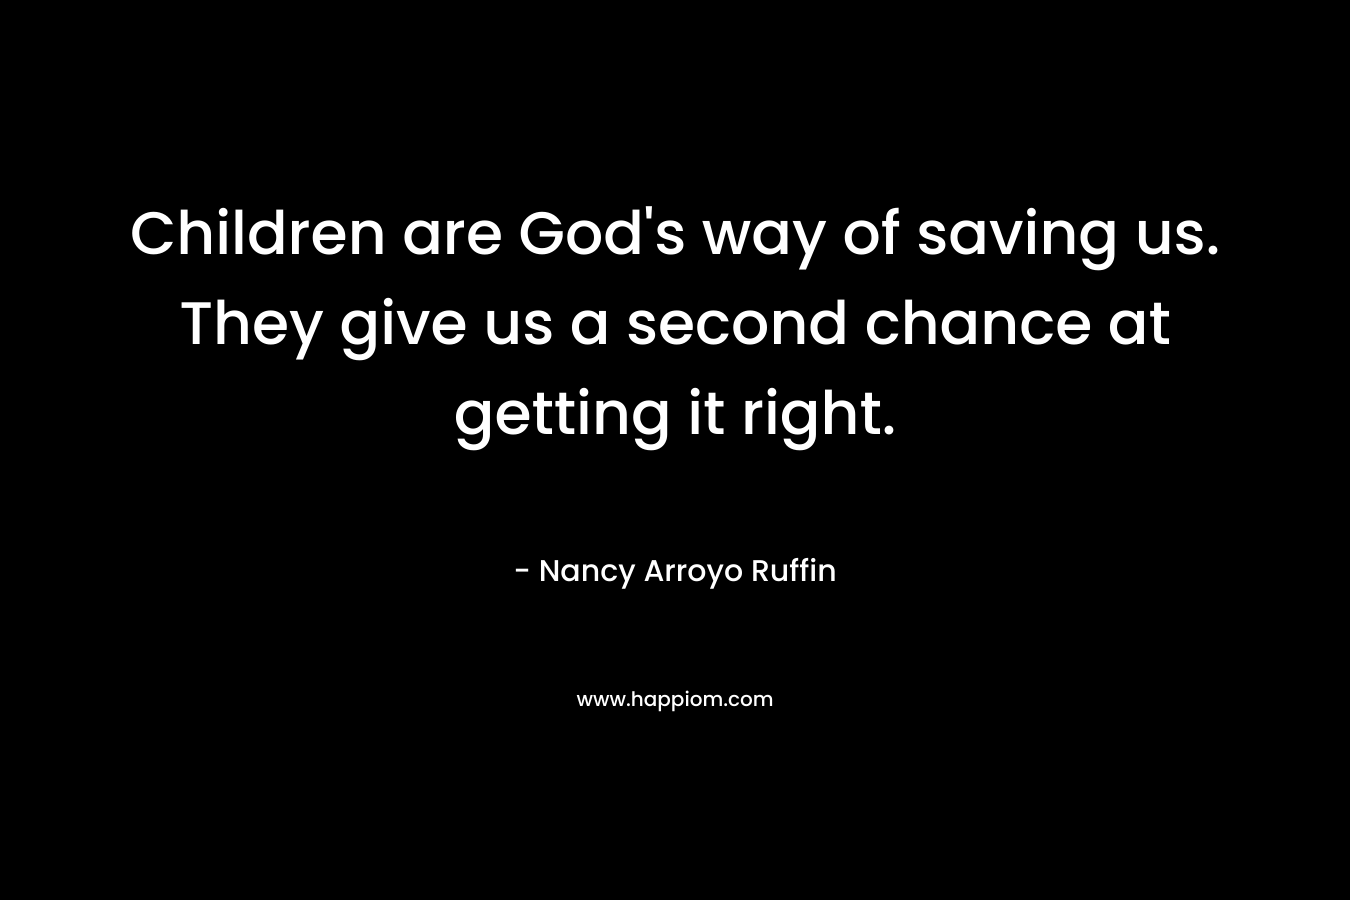 Children are God’s way of saving us. They give us a second chance at getting it right. – Nancy Arroyo Ruffin